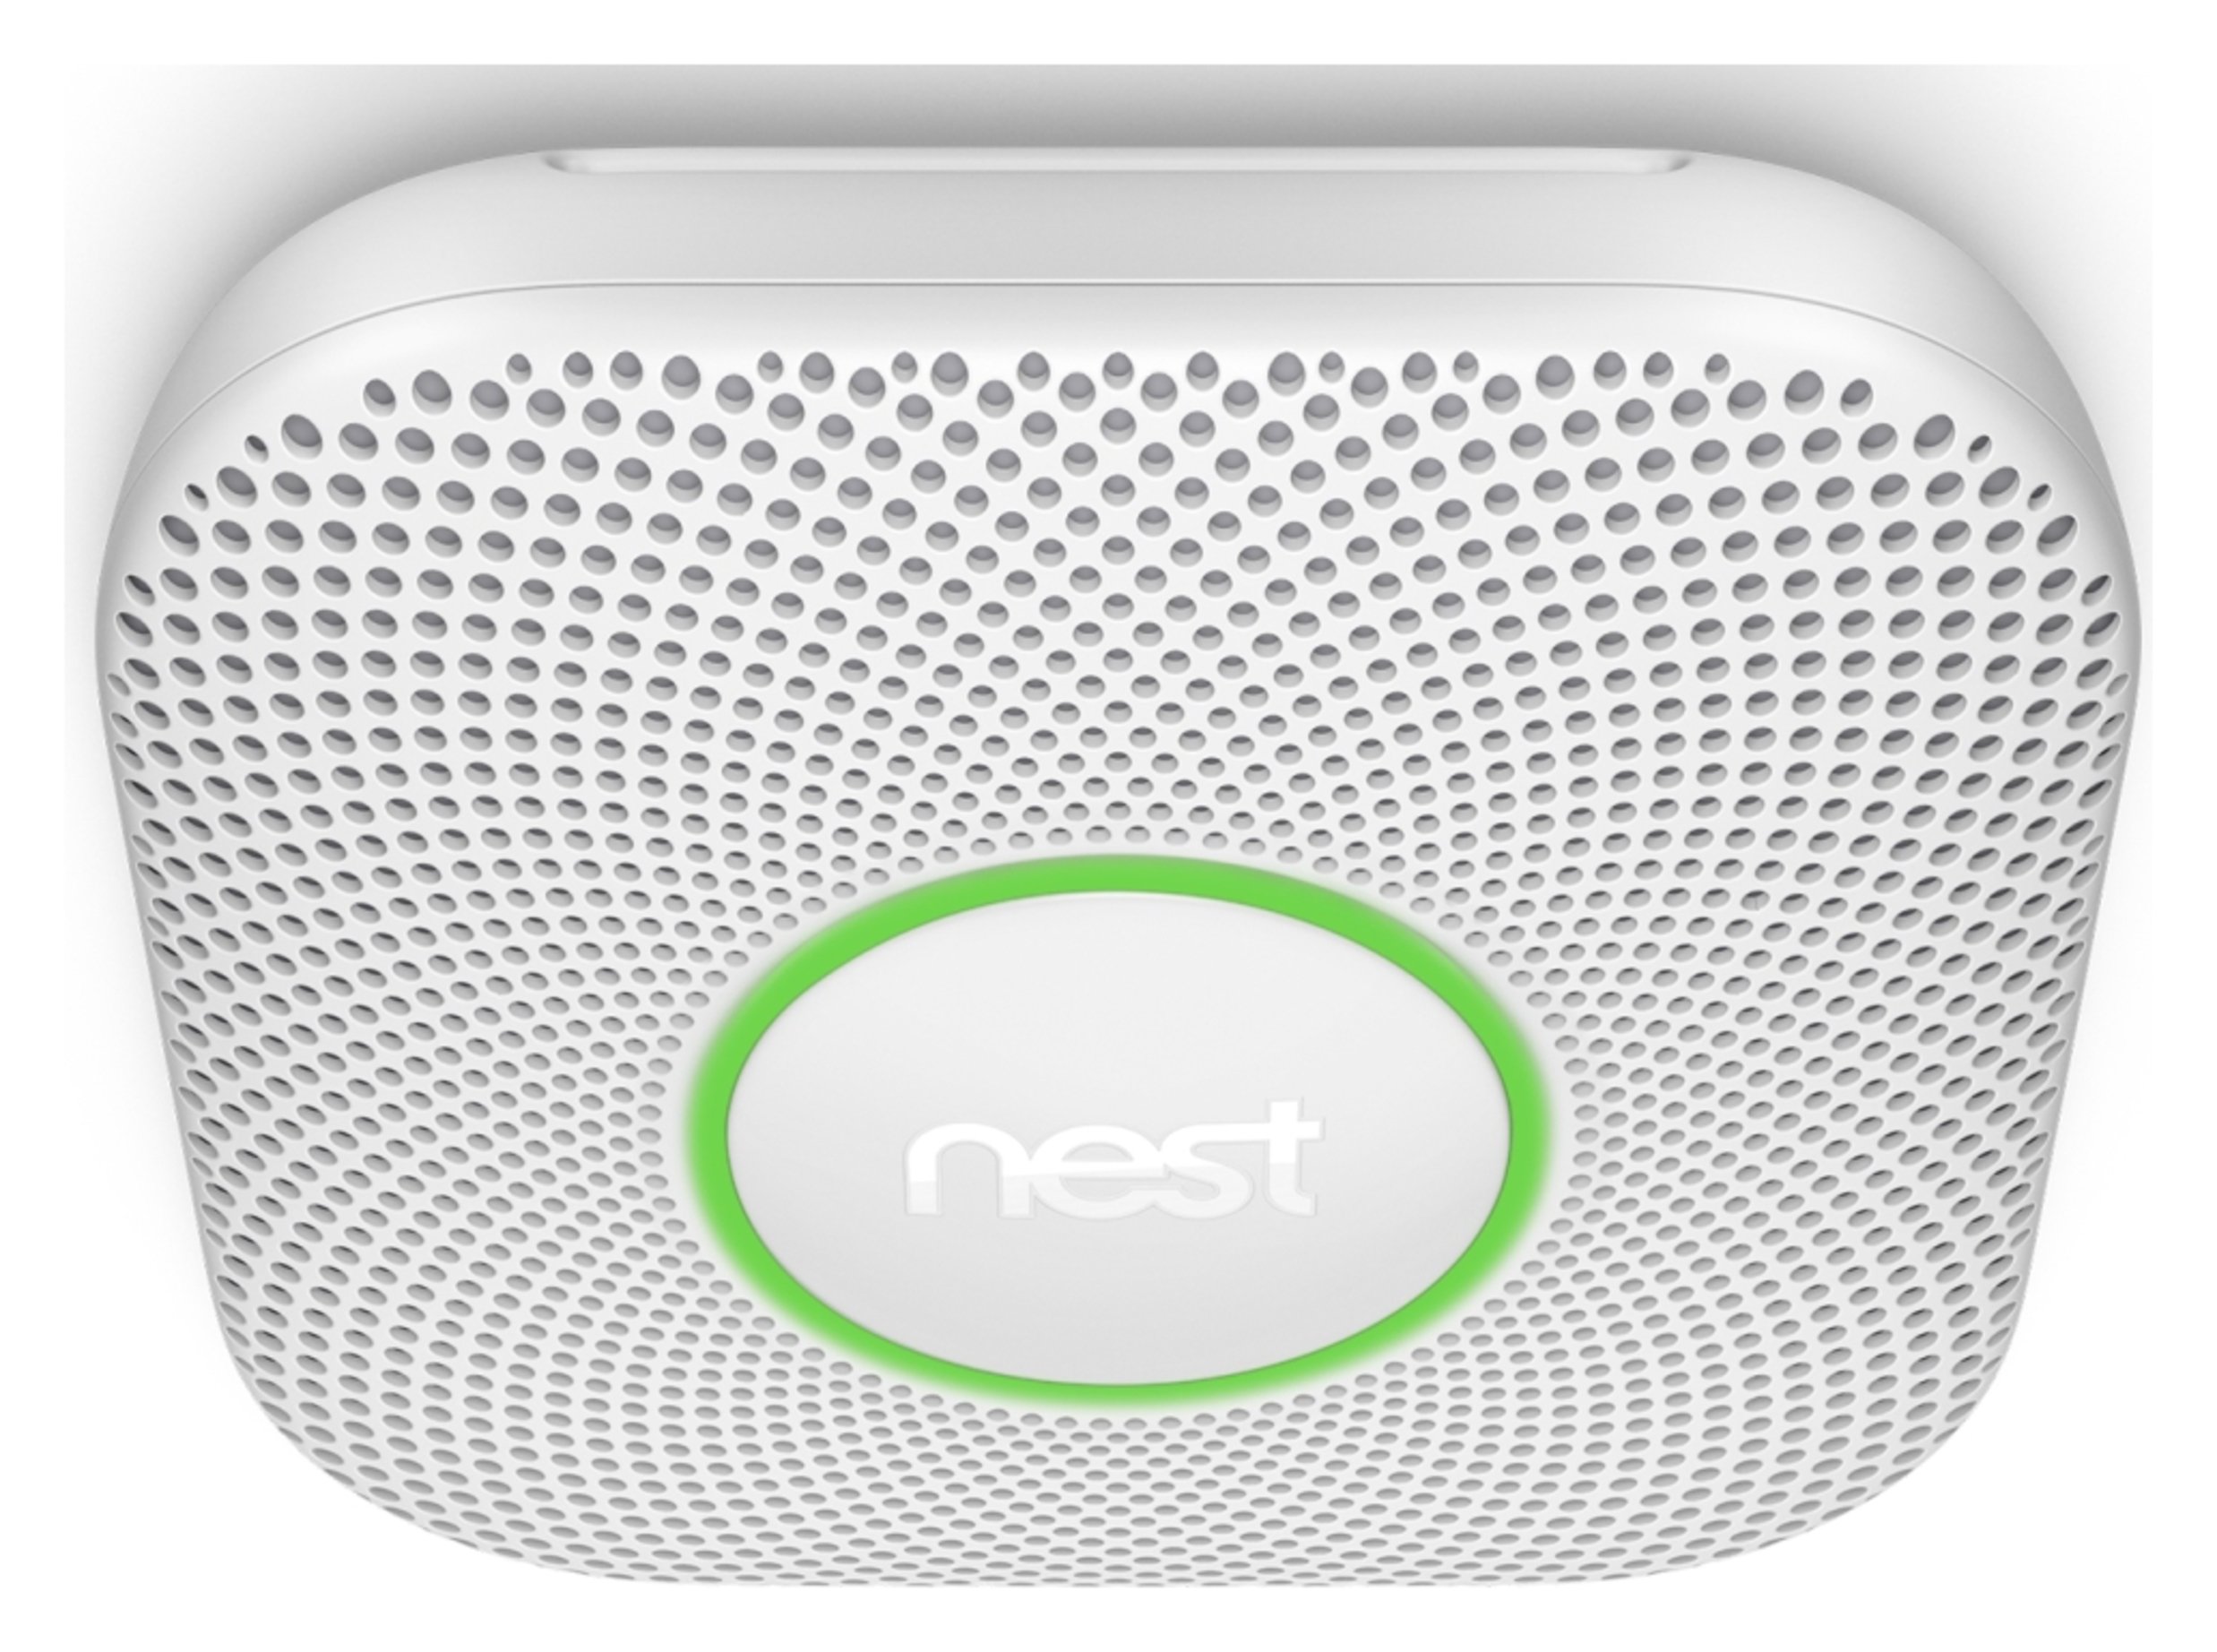 Google Nest Protect 2nd Gen Smoke and Carbon Monoxide Alarms Review